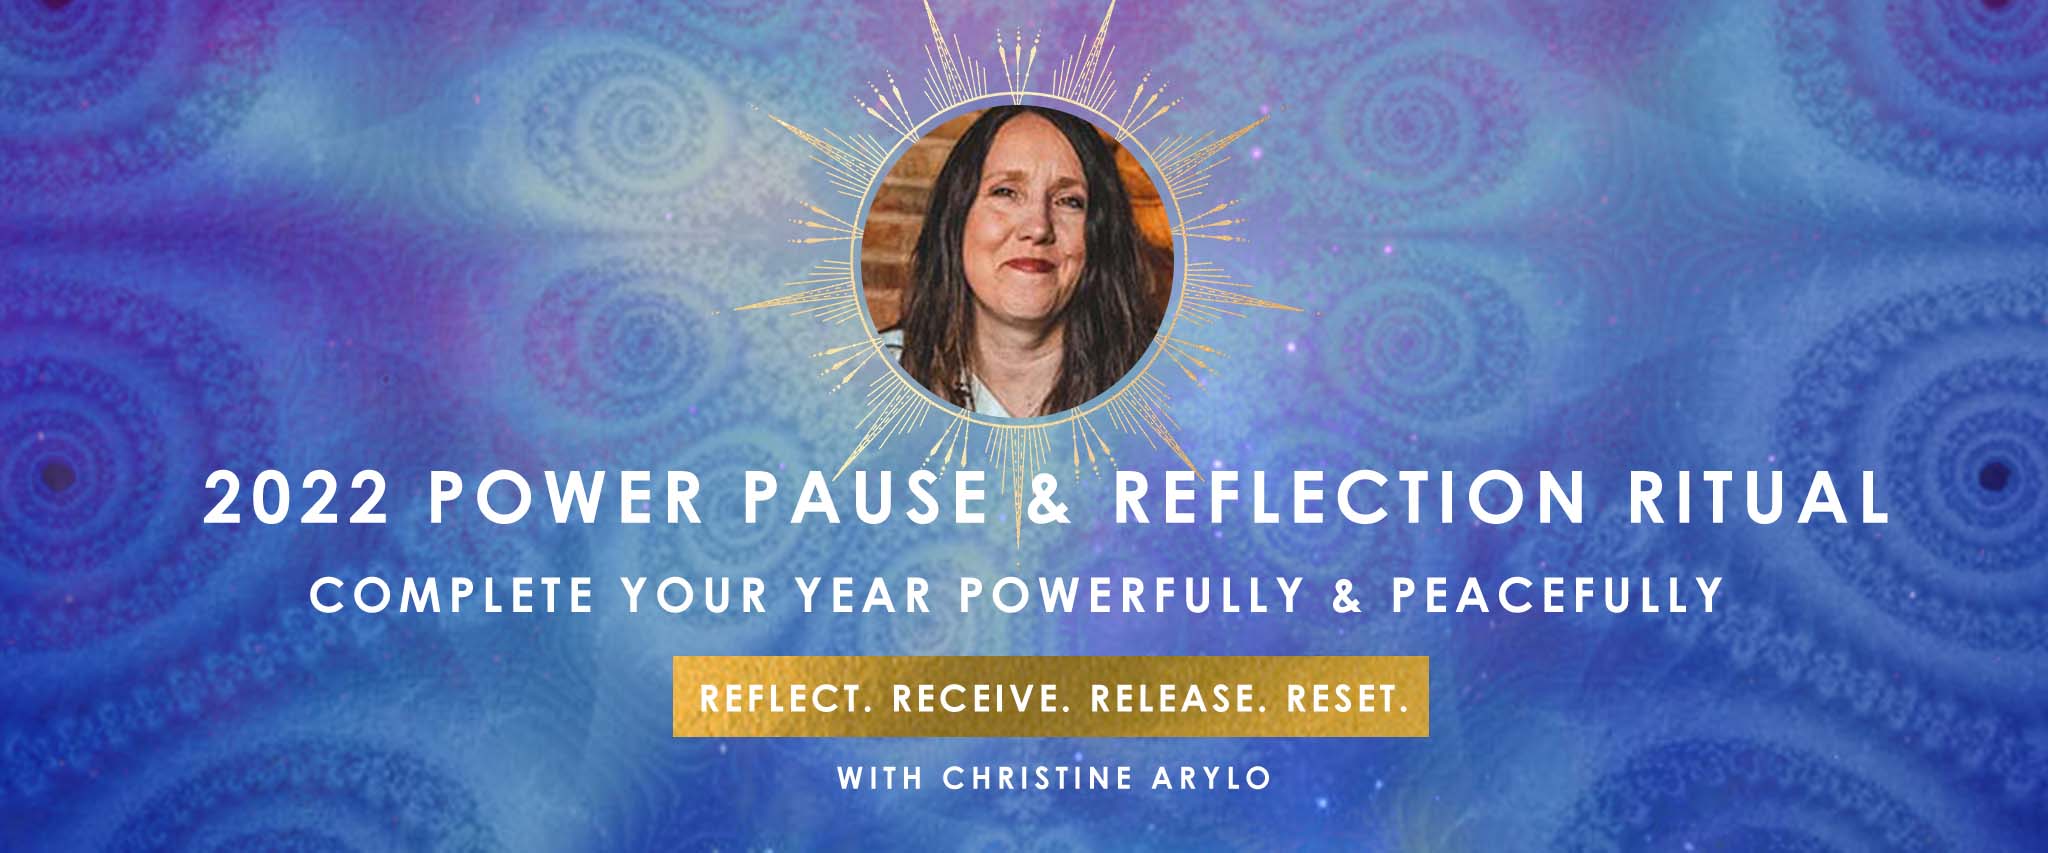 Year end reflection ritual and power pause with Christine Arylo